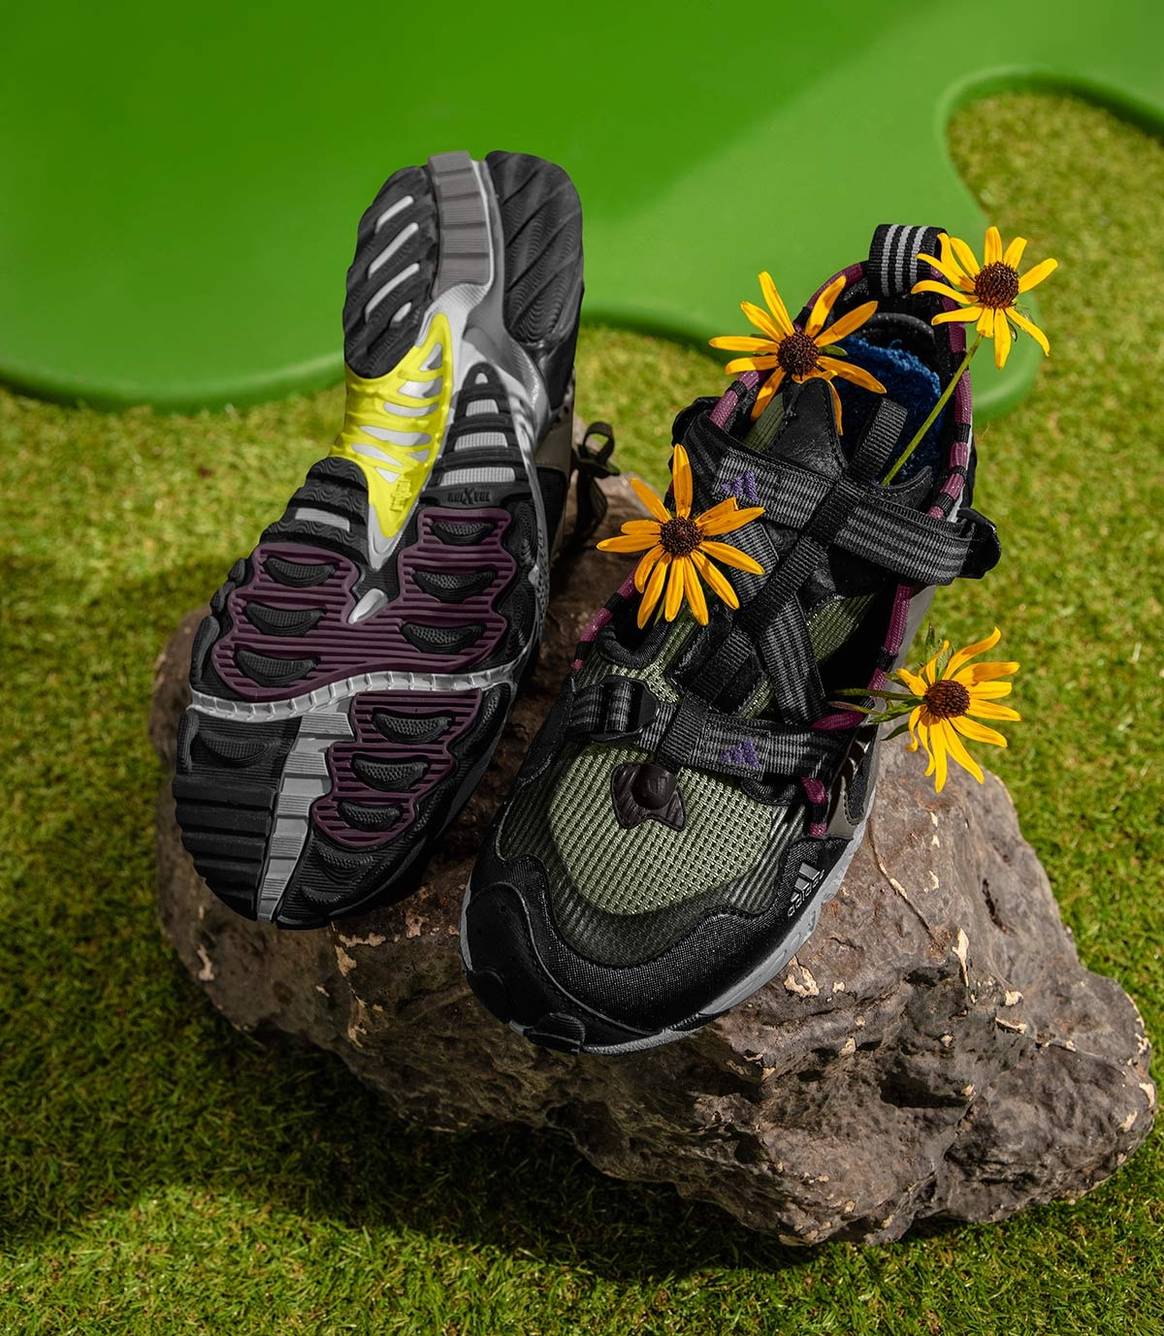 In pictures: Adidas launches gardening-themed collection